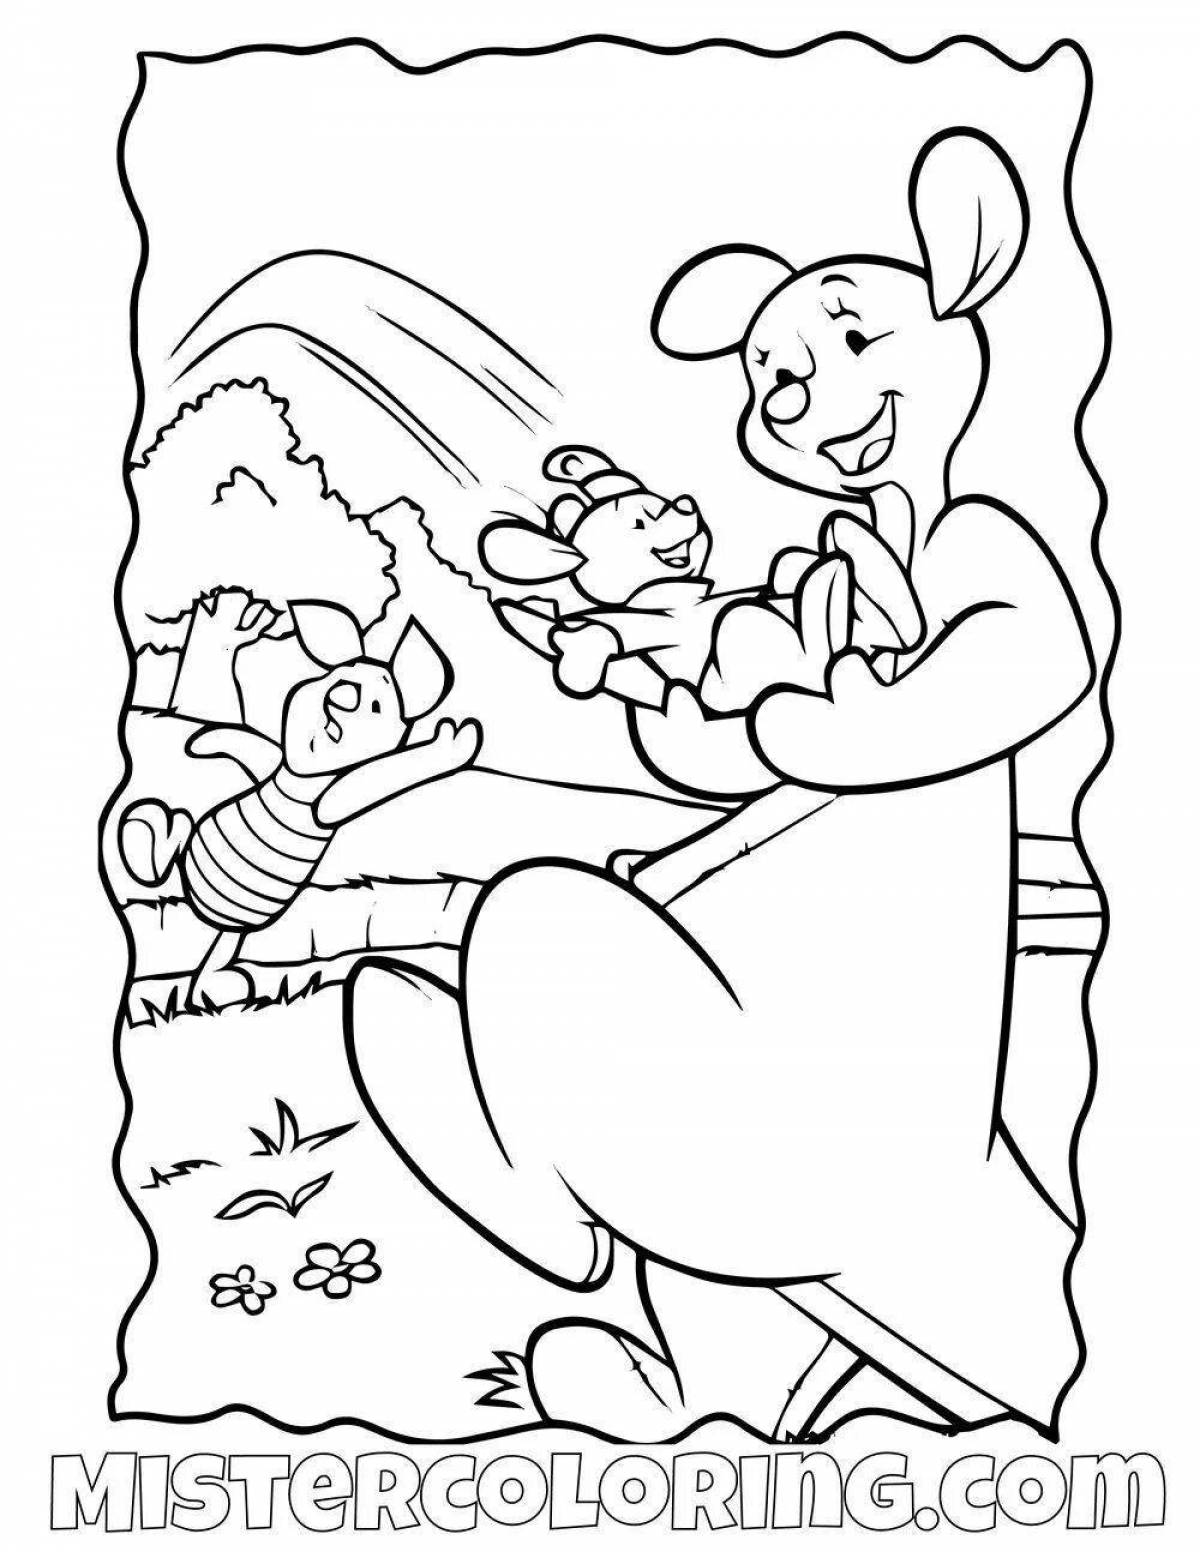 Color-frenzy pound coloring page для детей